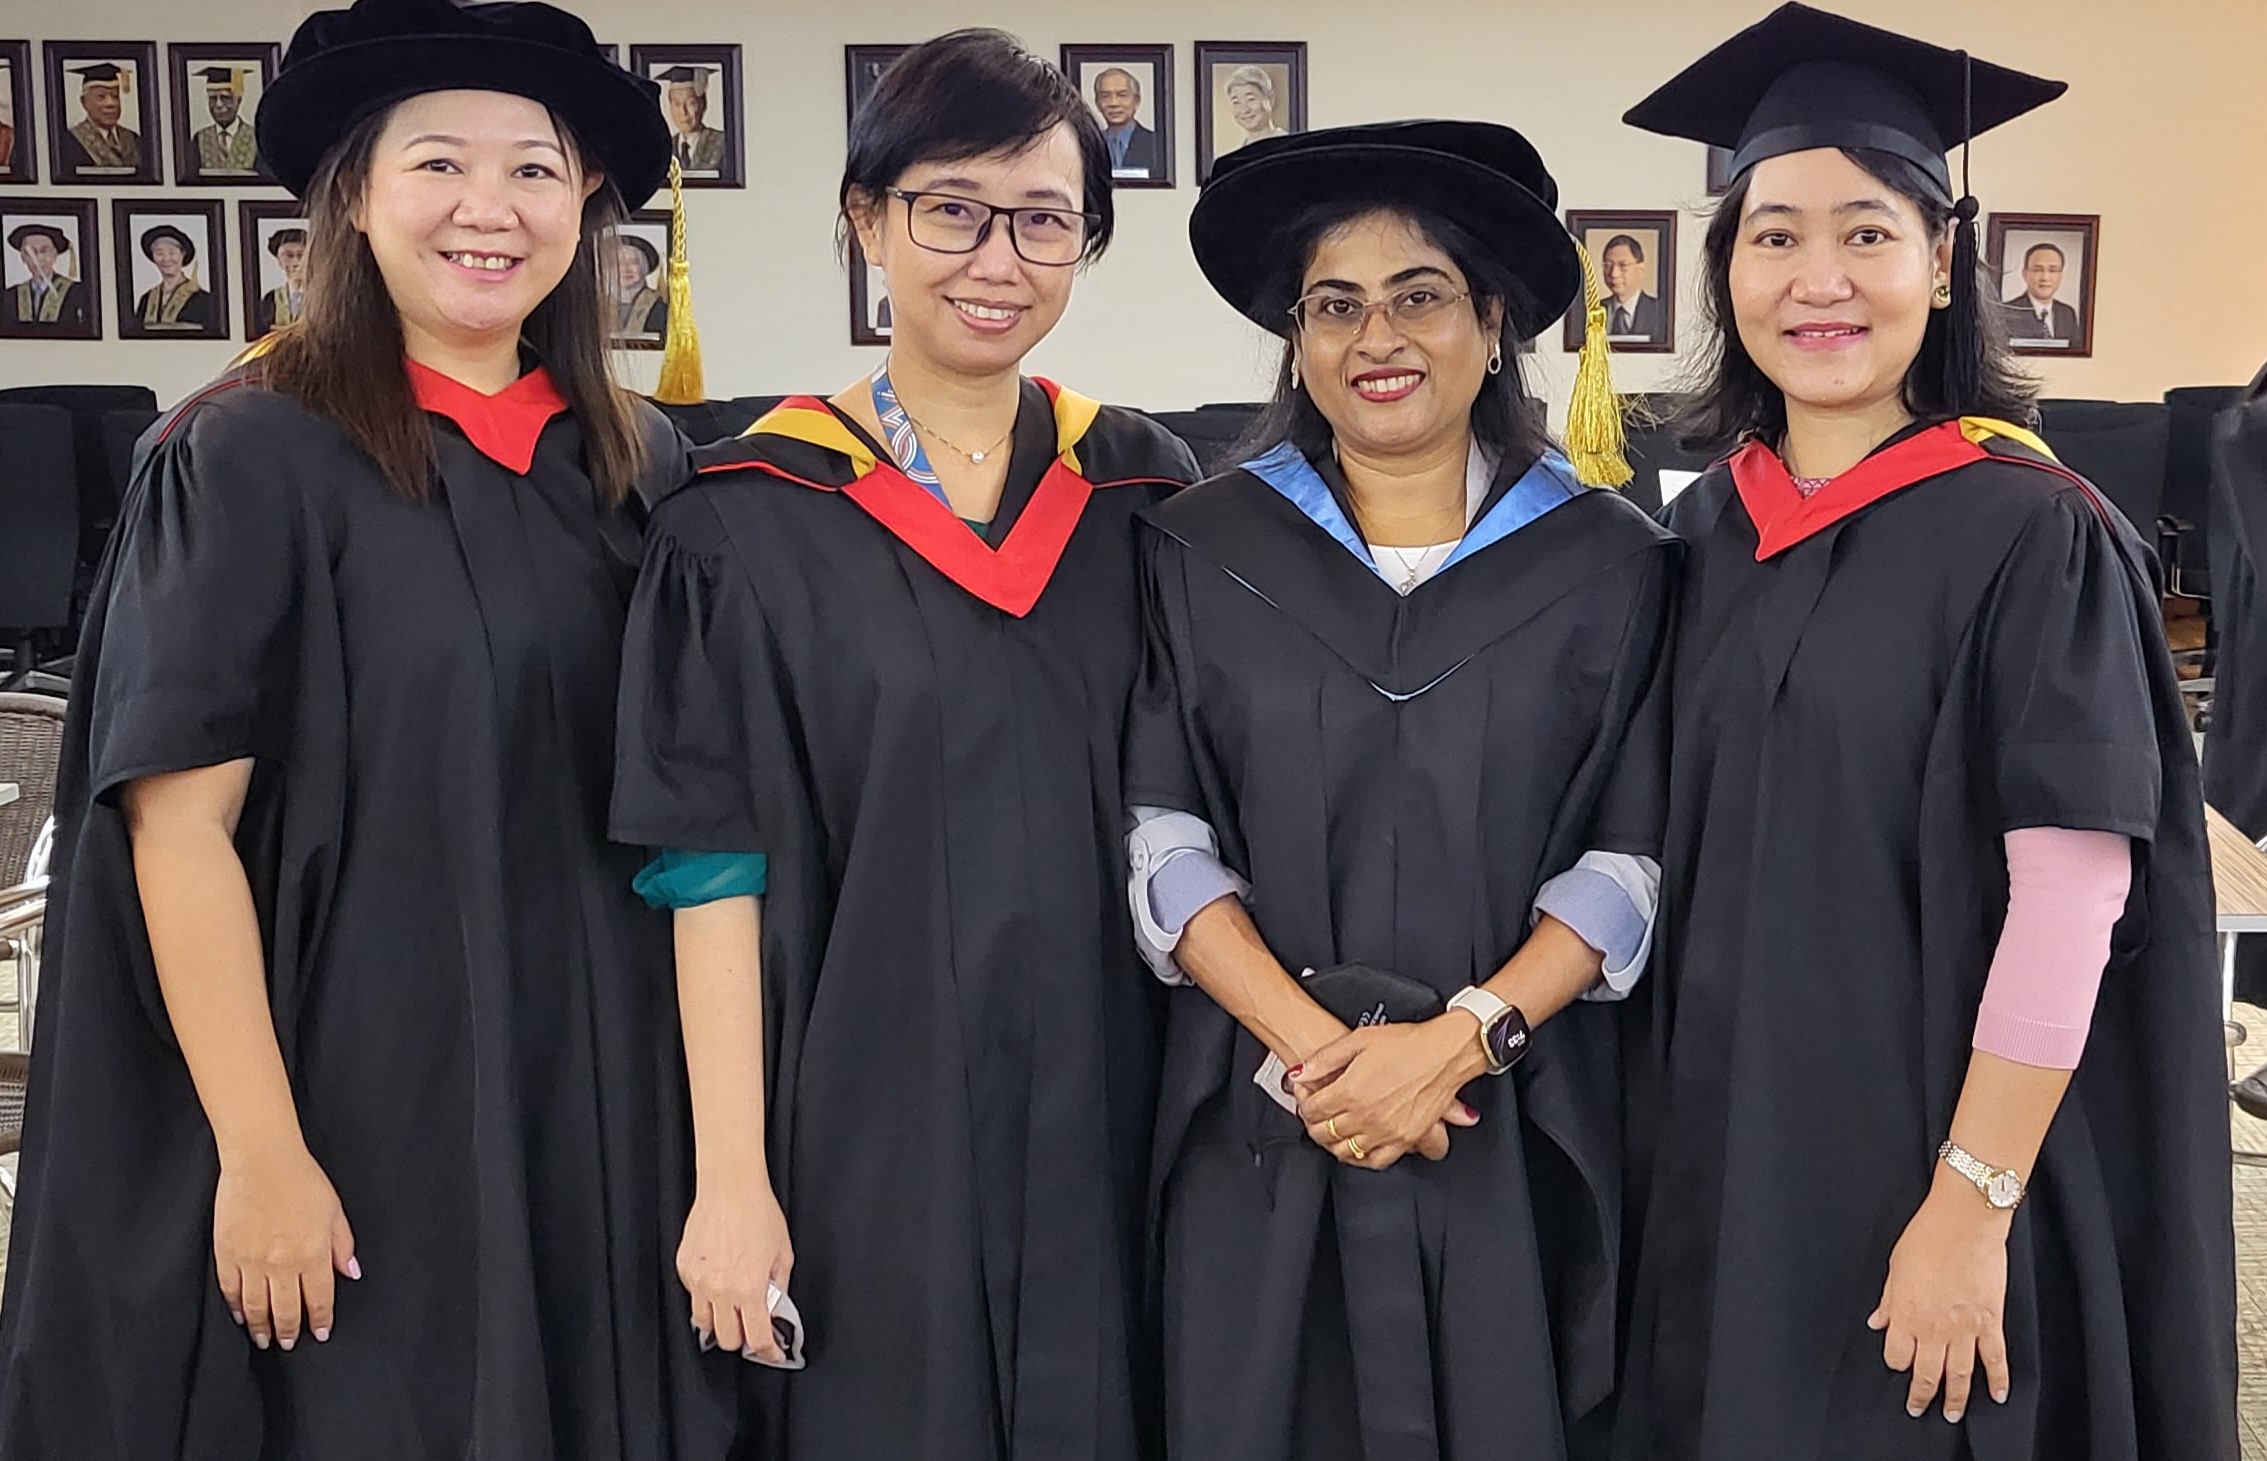 Dr Anupa Sivakumar, Lecturer, Human Biology, School of Medicine, IMU shares her trials and tribulations of being a PhD in Medical and Health Sciences at IMU.